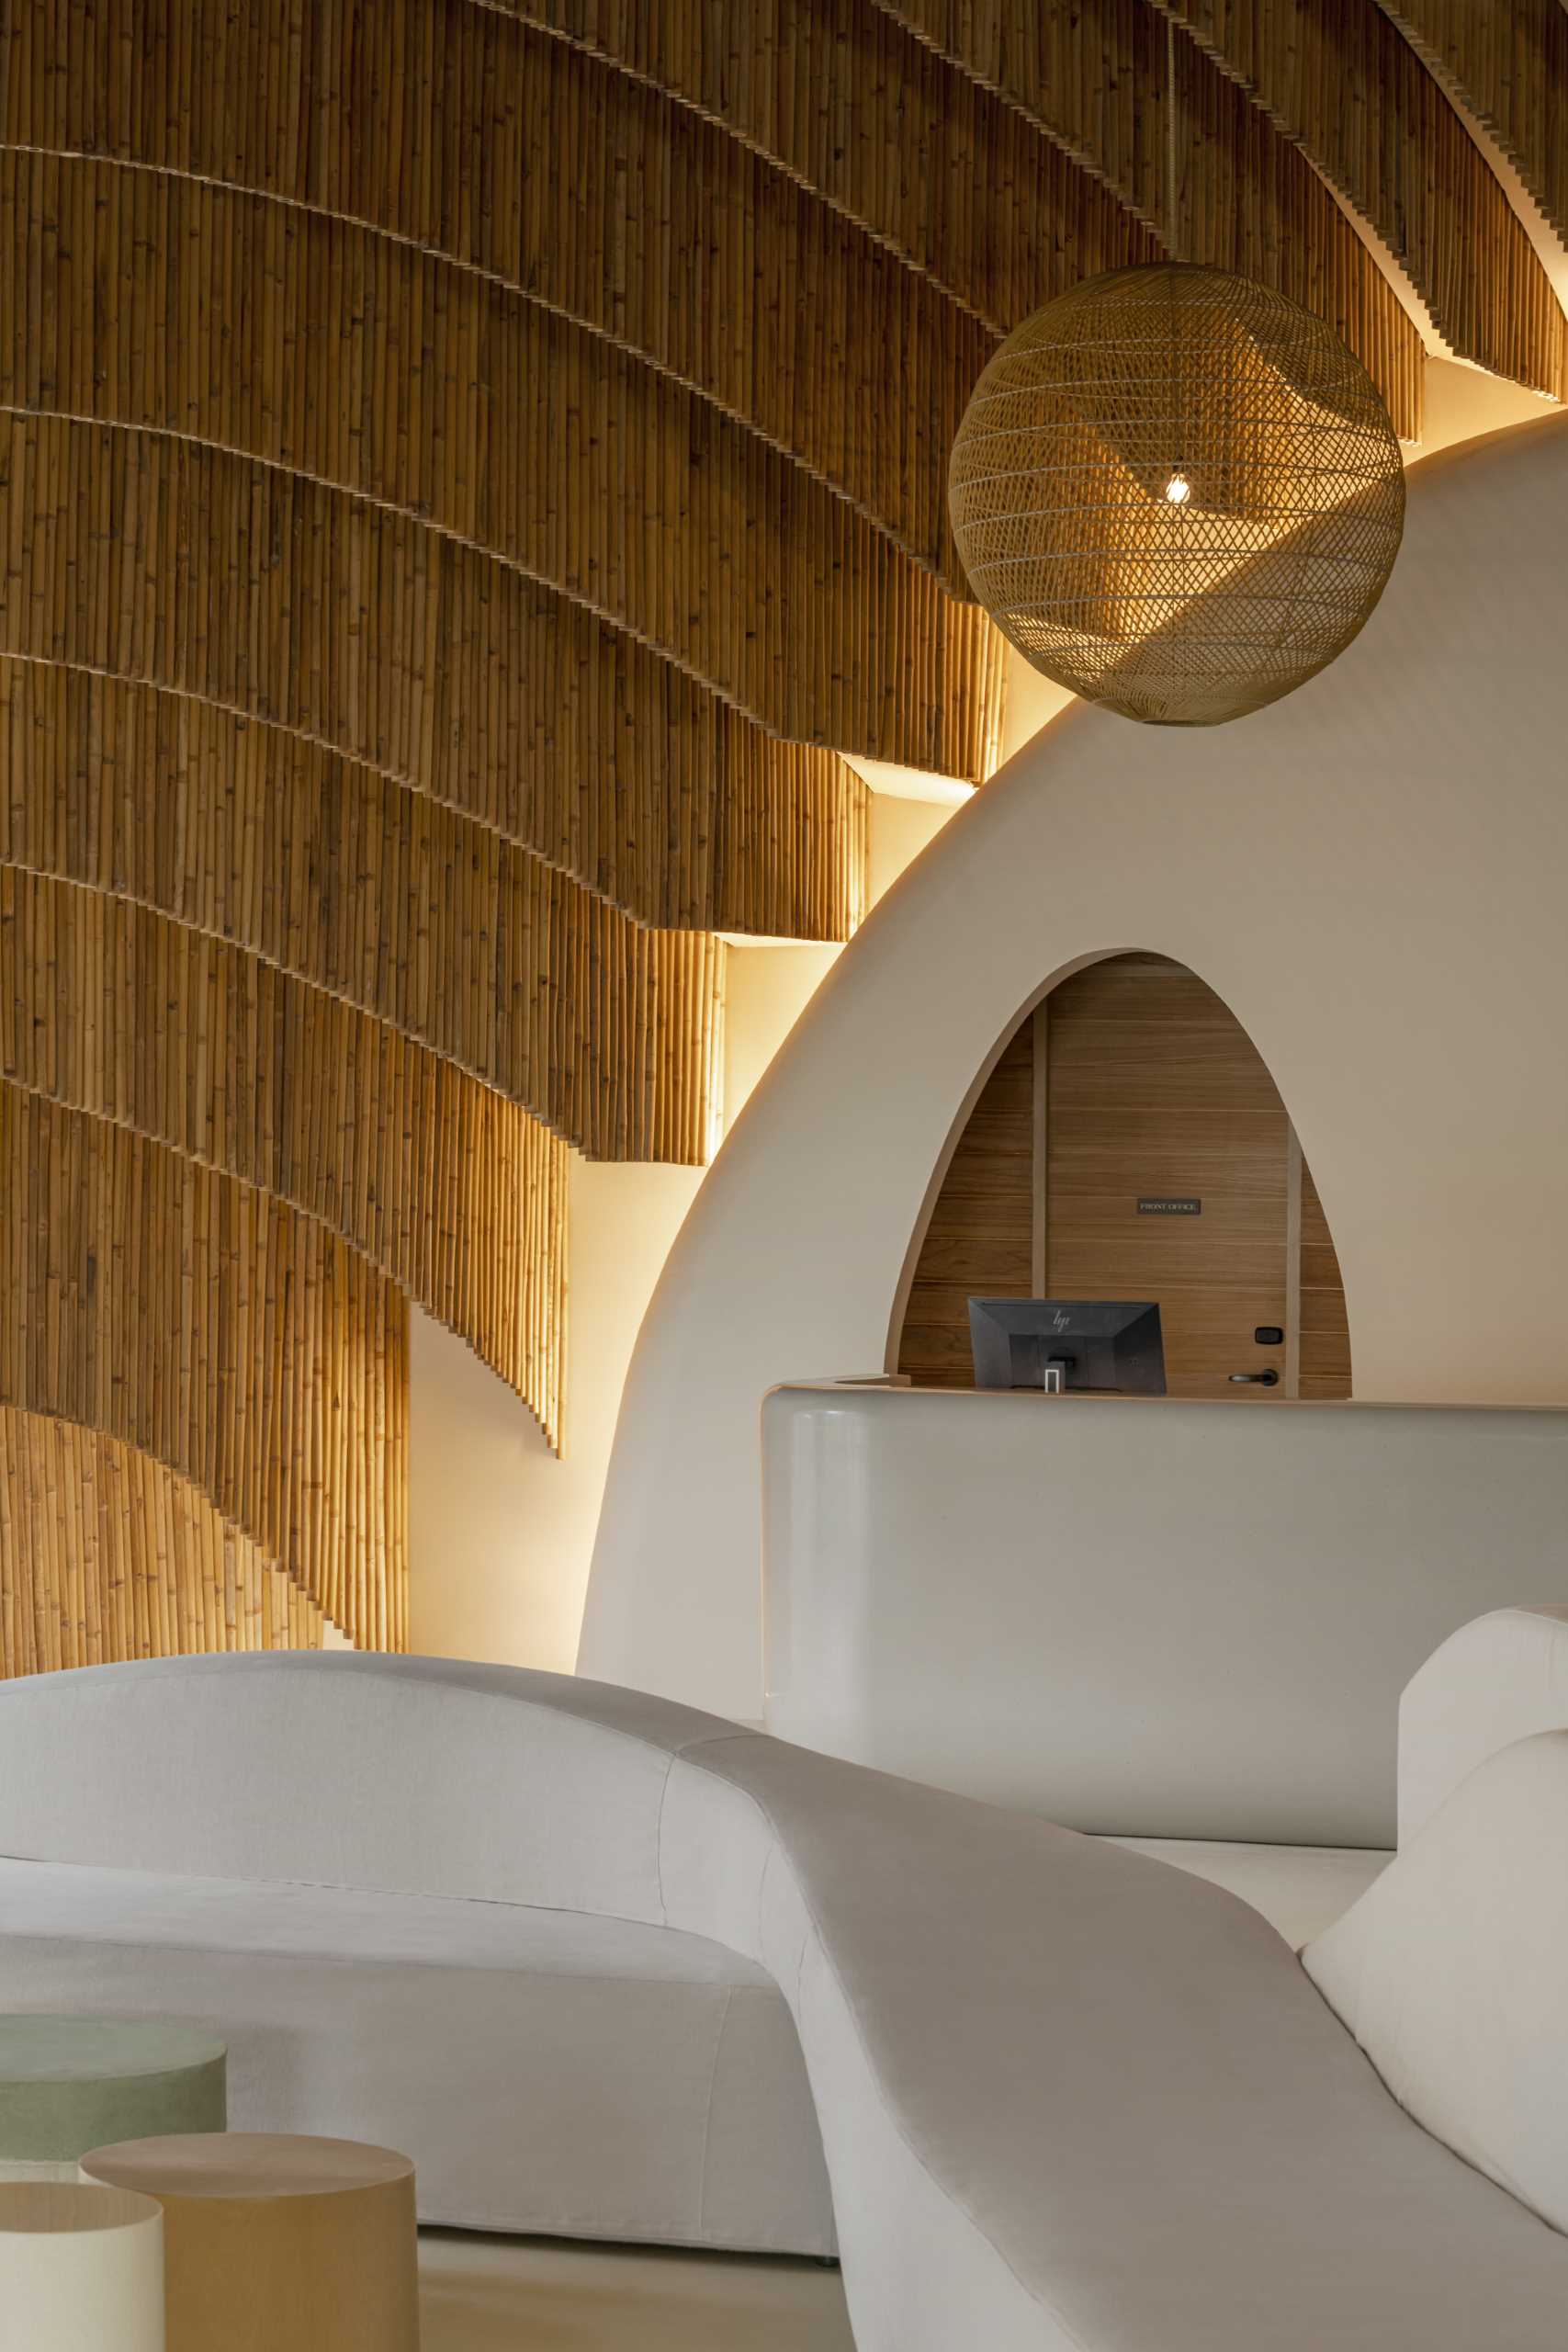 A modern hotel lobby that includes curved walls, hanging planes of bamboo, and hidden lighting that highlights the design.